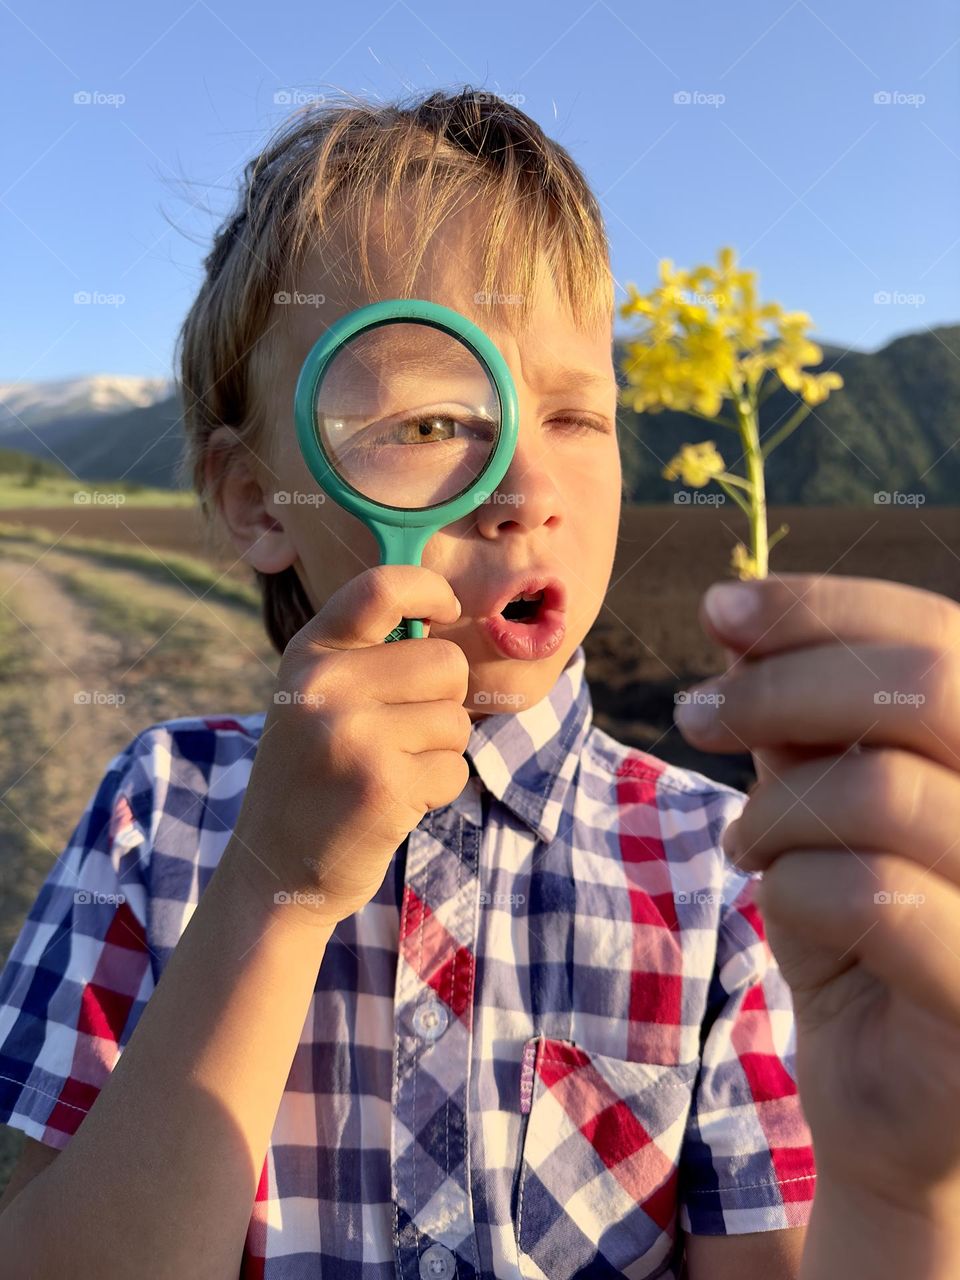 Boy looking at a flower through a magnifying glass